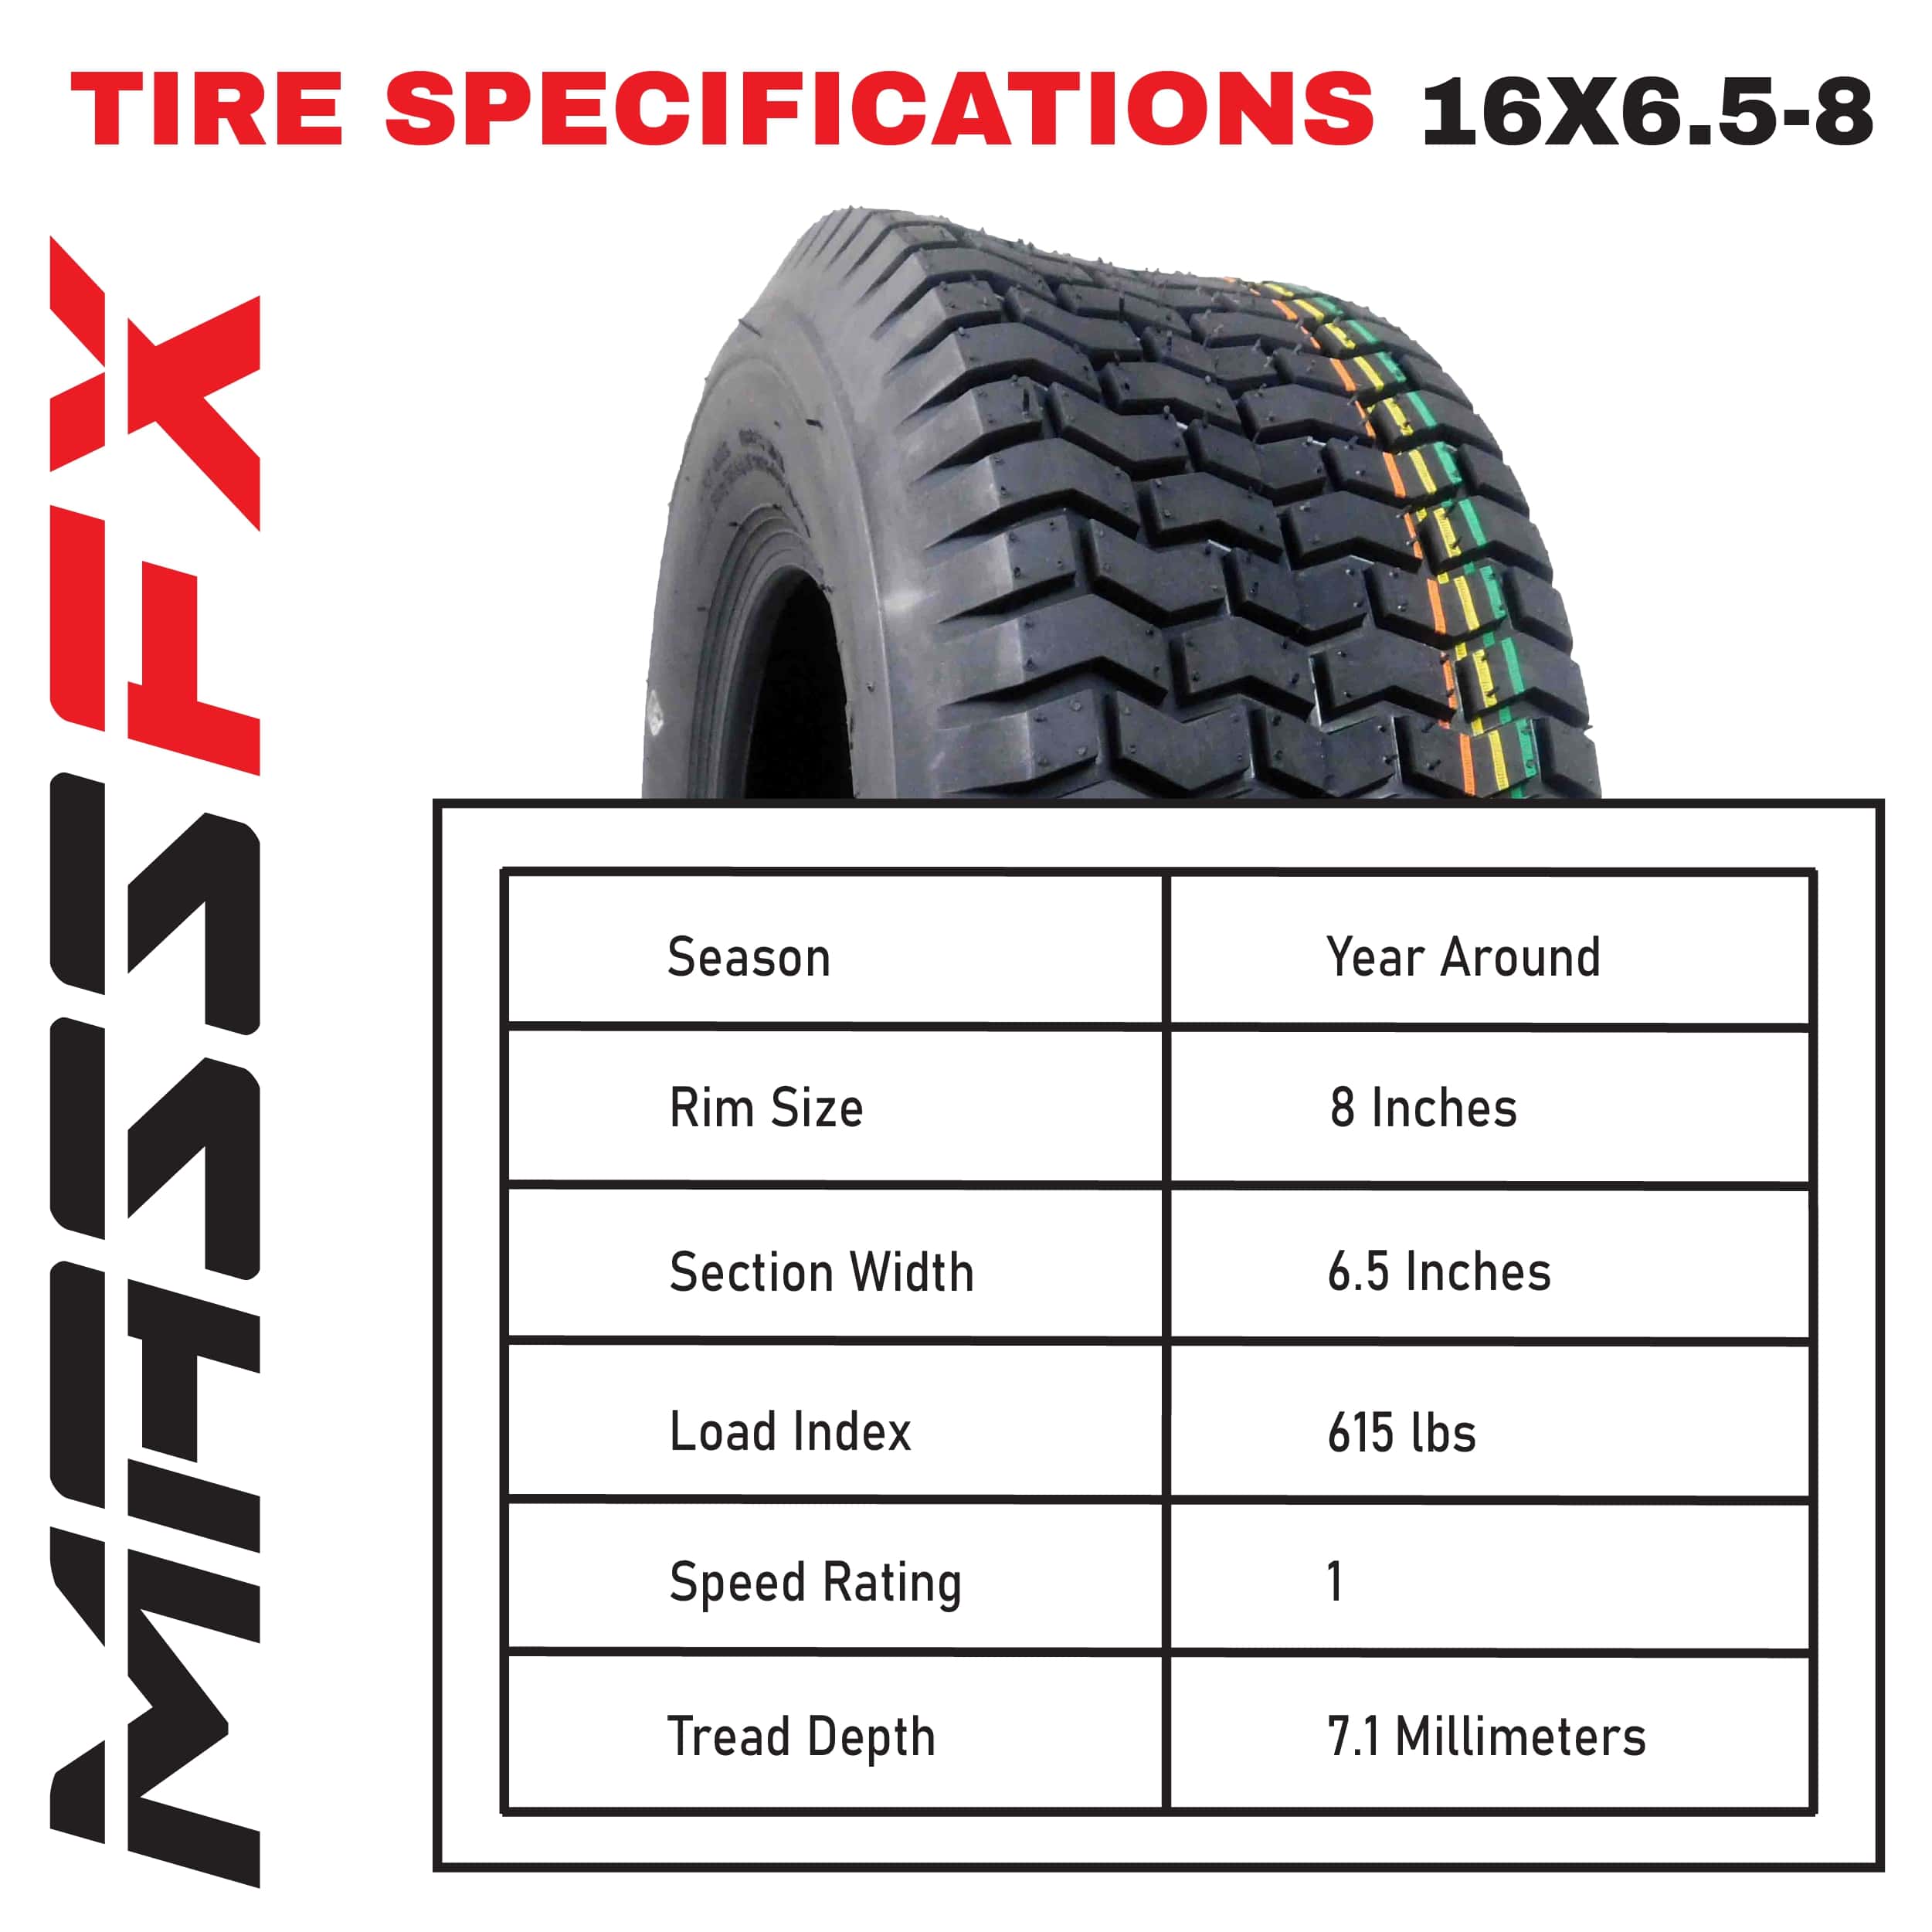 4 New MASSFX Lawn Mower Tires 16x6.5-8 & 22x9.5-12 4 PLY 4 Pack Lawn & Garden